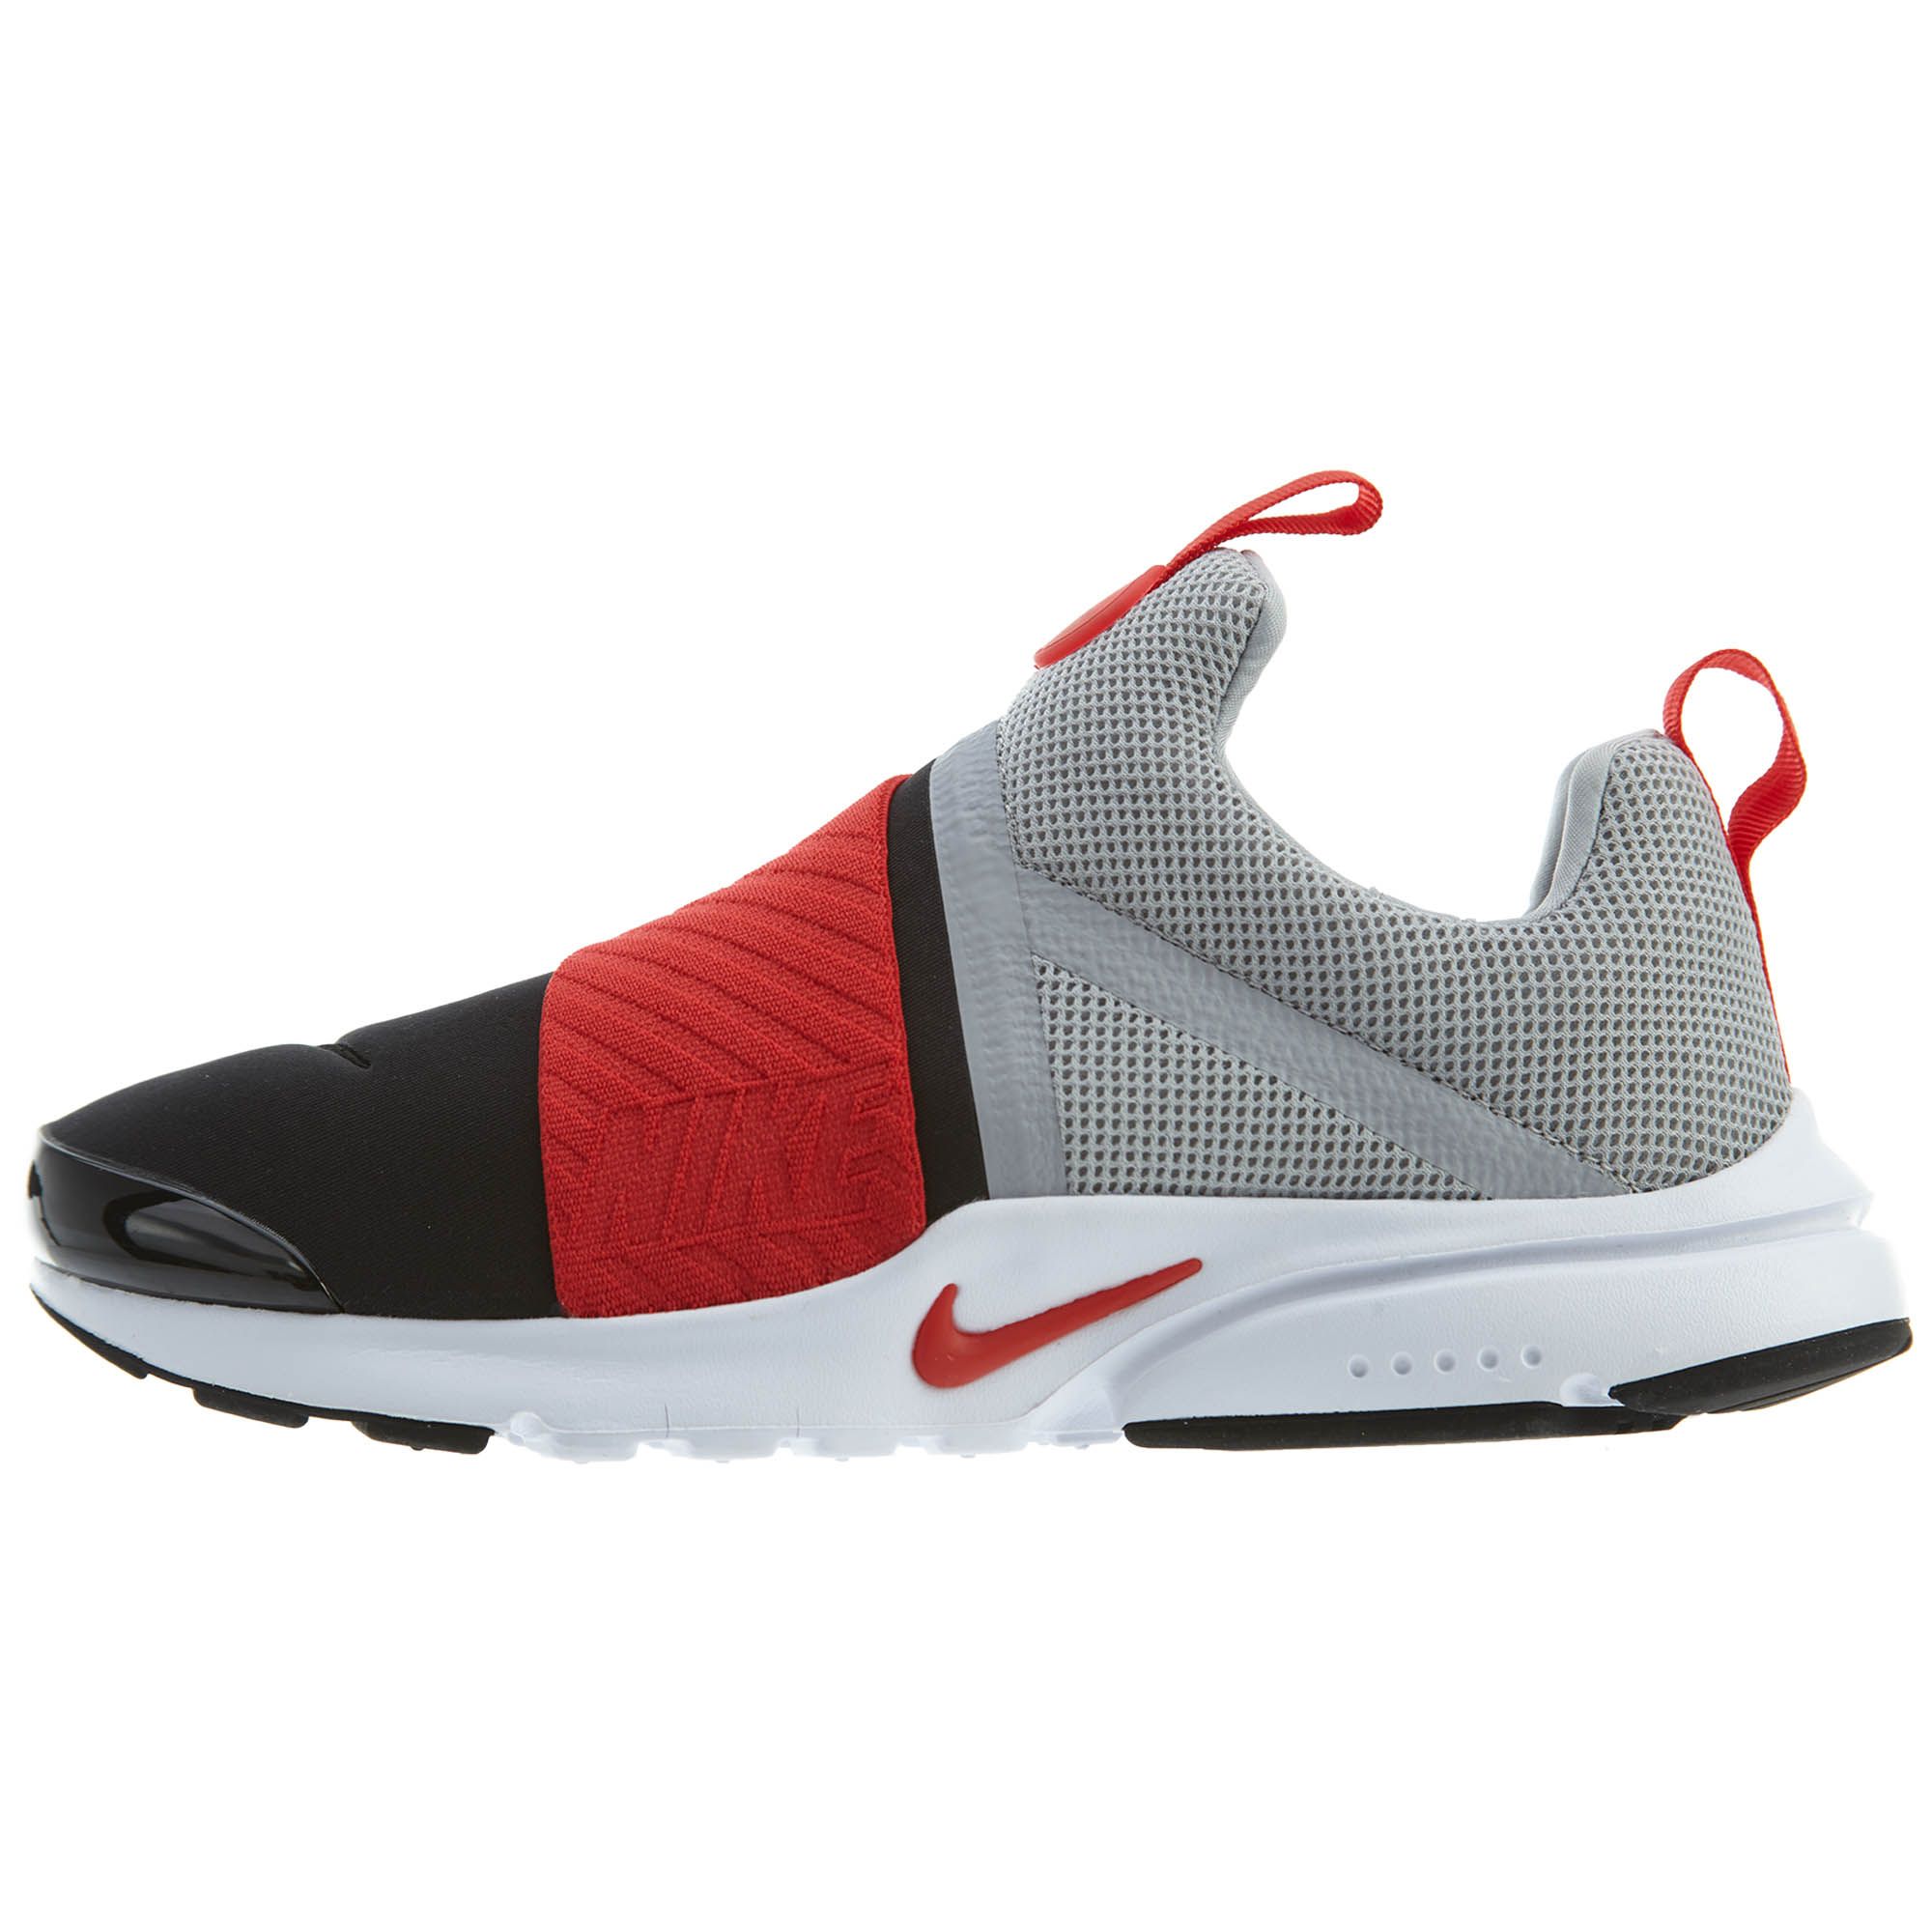 nike presto extreme red and black